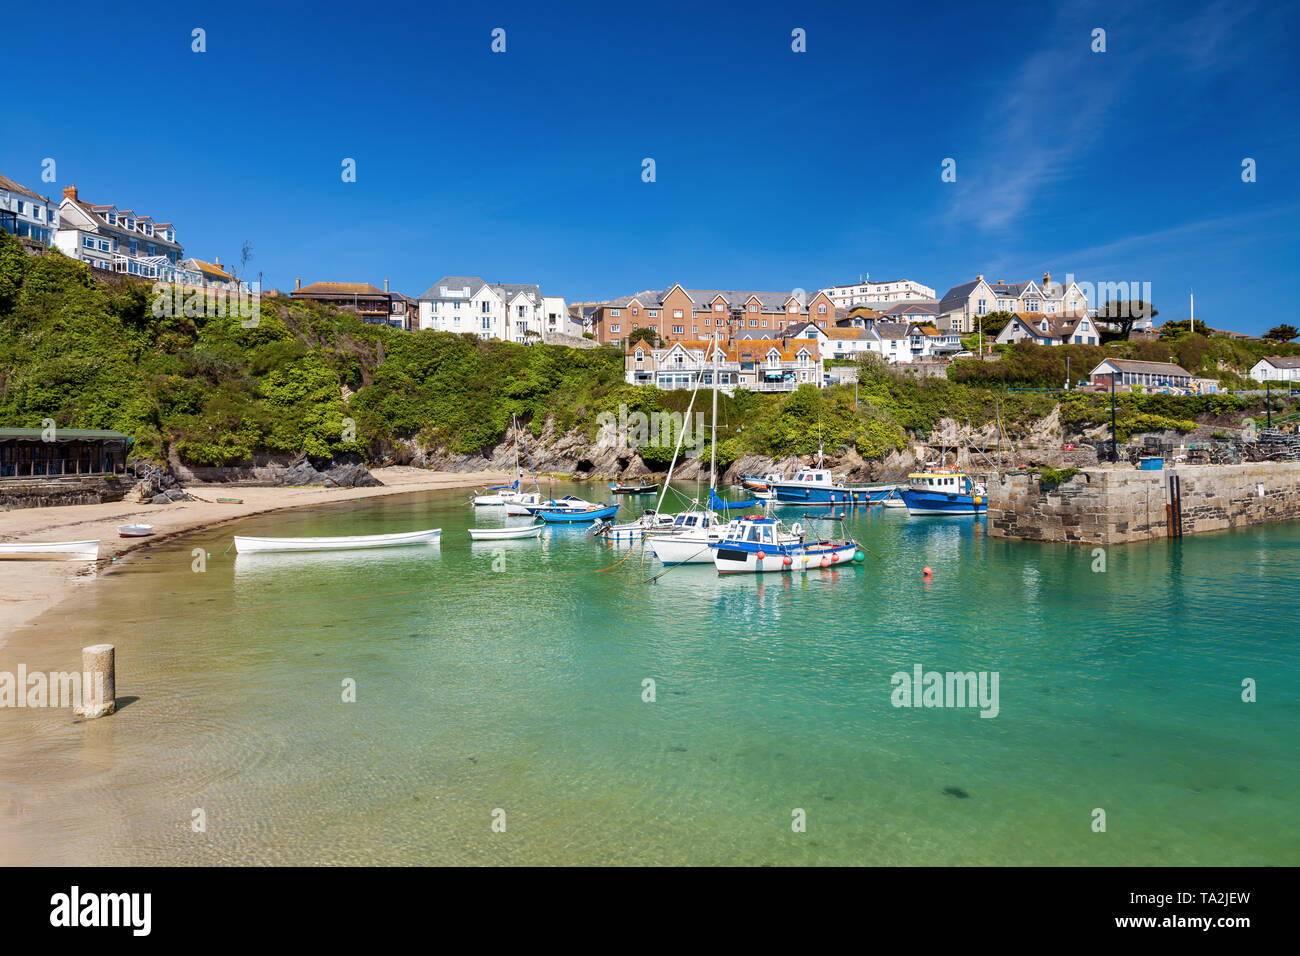 Stunning summer day at Newquay Harbour on the North Cornish Coast. Cornwall England UK Europe Stock Photo